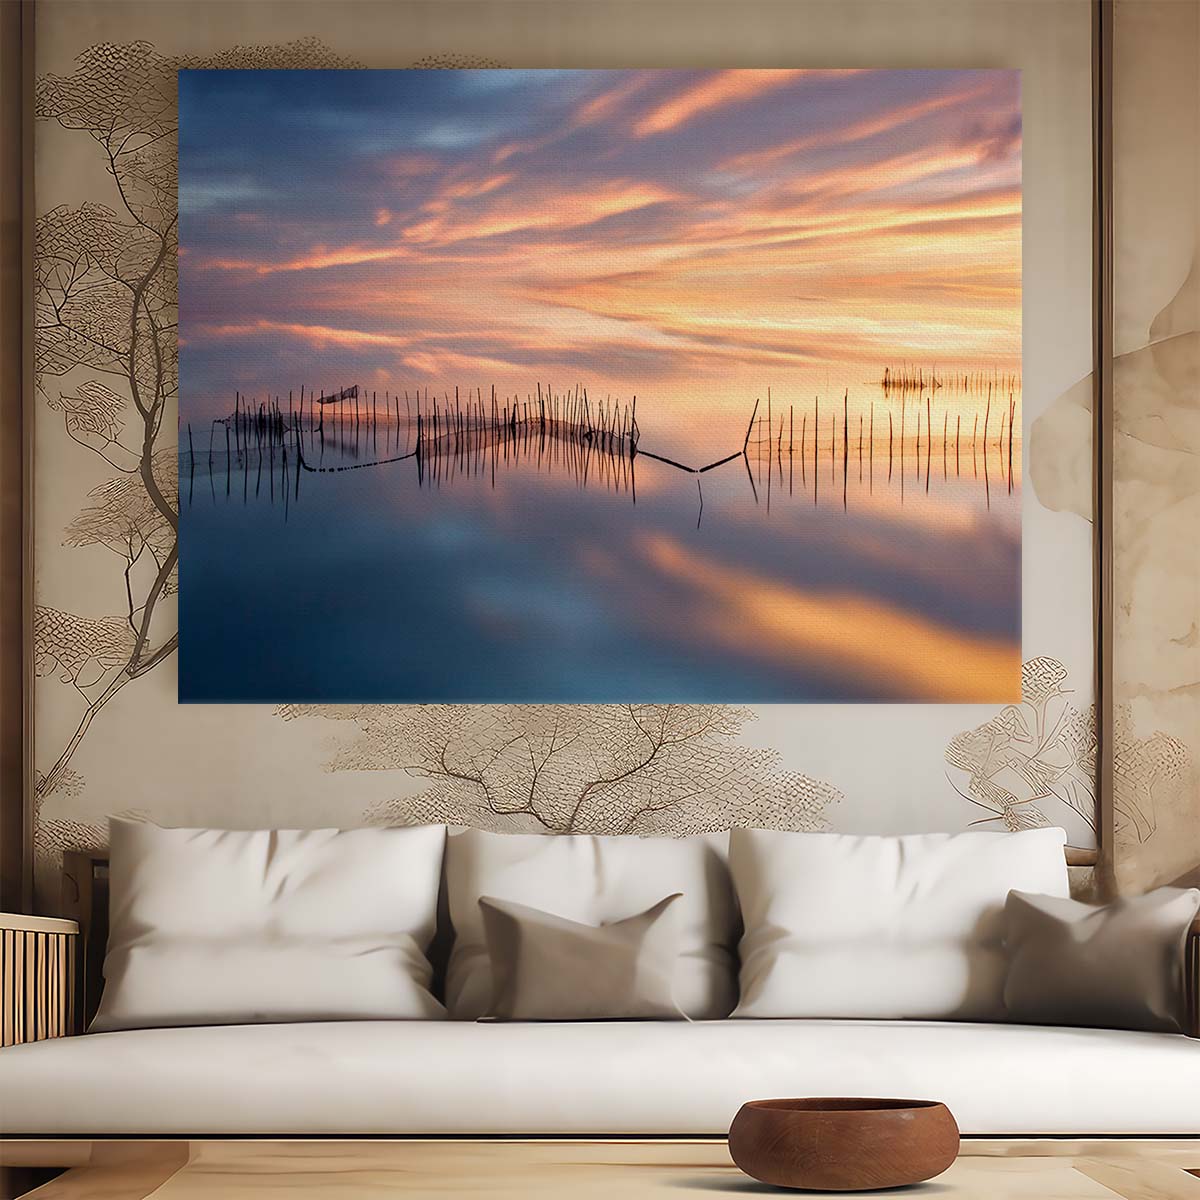 Serene Valencia Sunset Seascape Minimalist Wall Art by Luxuriance Designs. Made in USA.